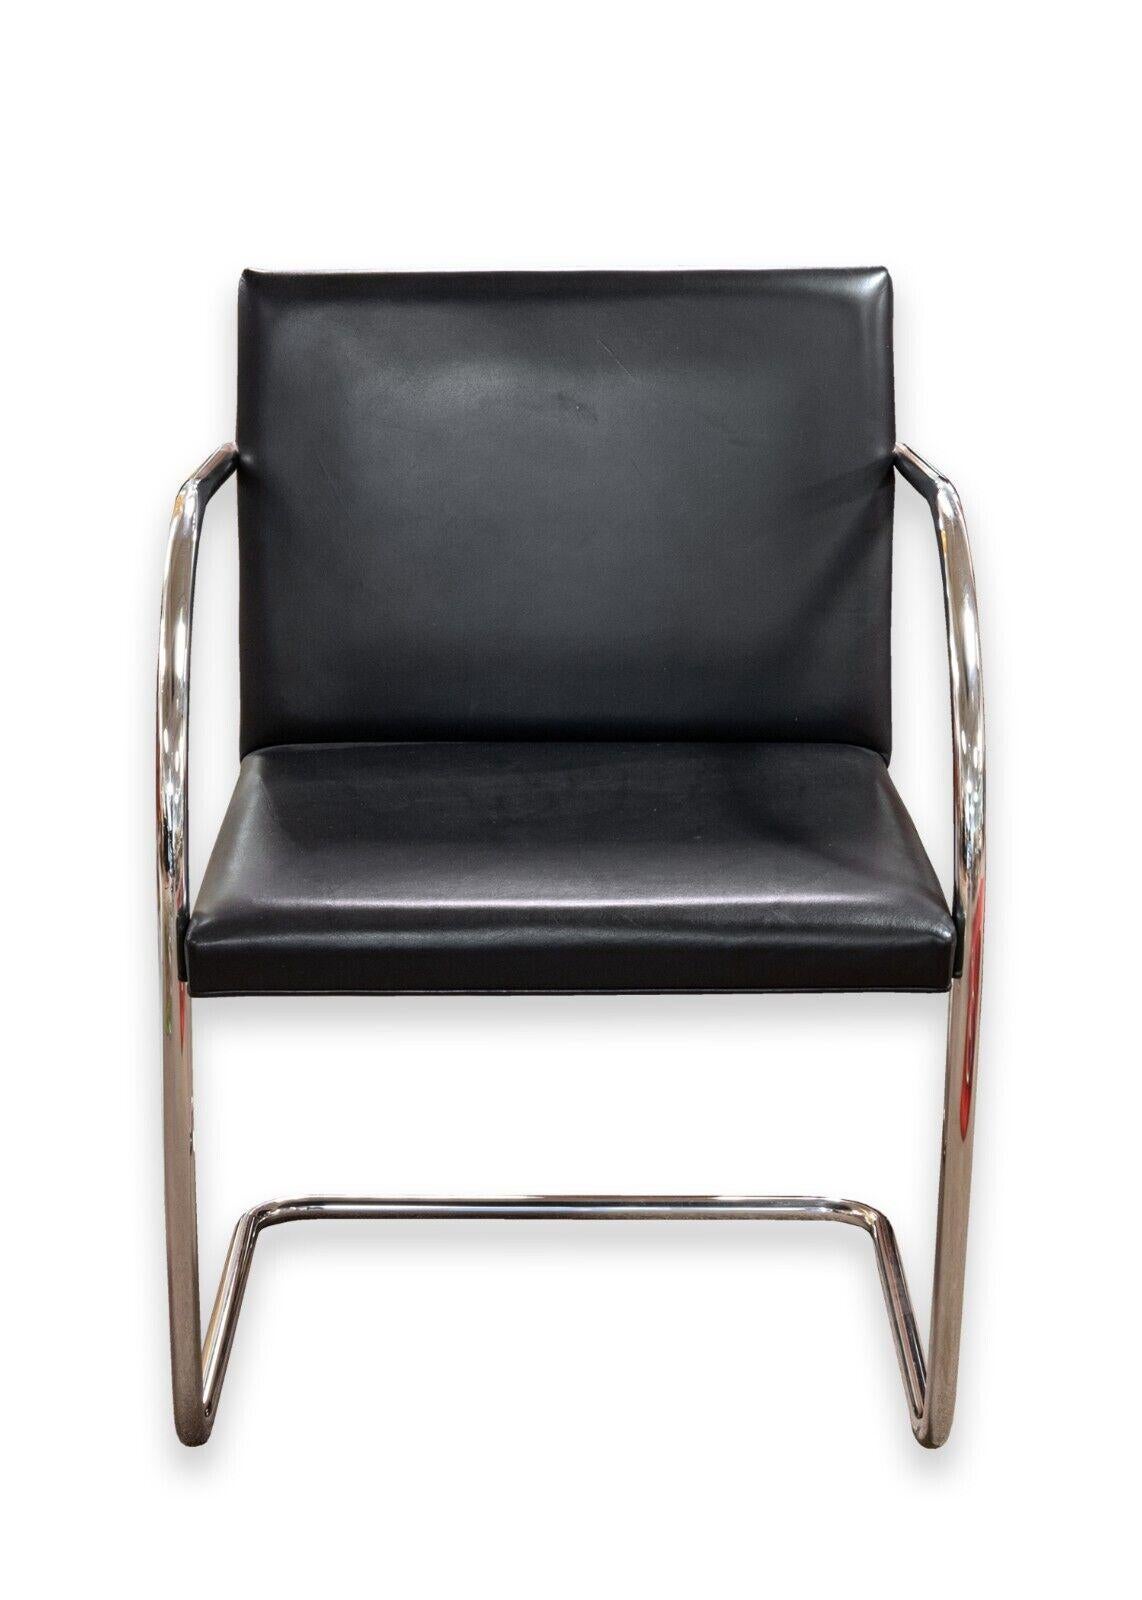 Mid-Century Modern Set of 4 Mies van der Rohe for Knoll Tubular Black Leather Brno MCM Chairs